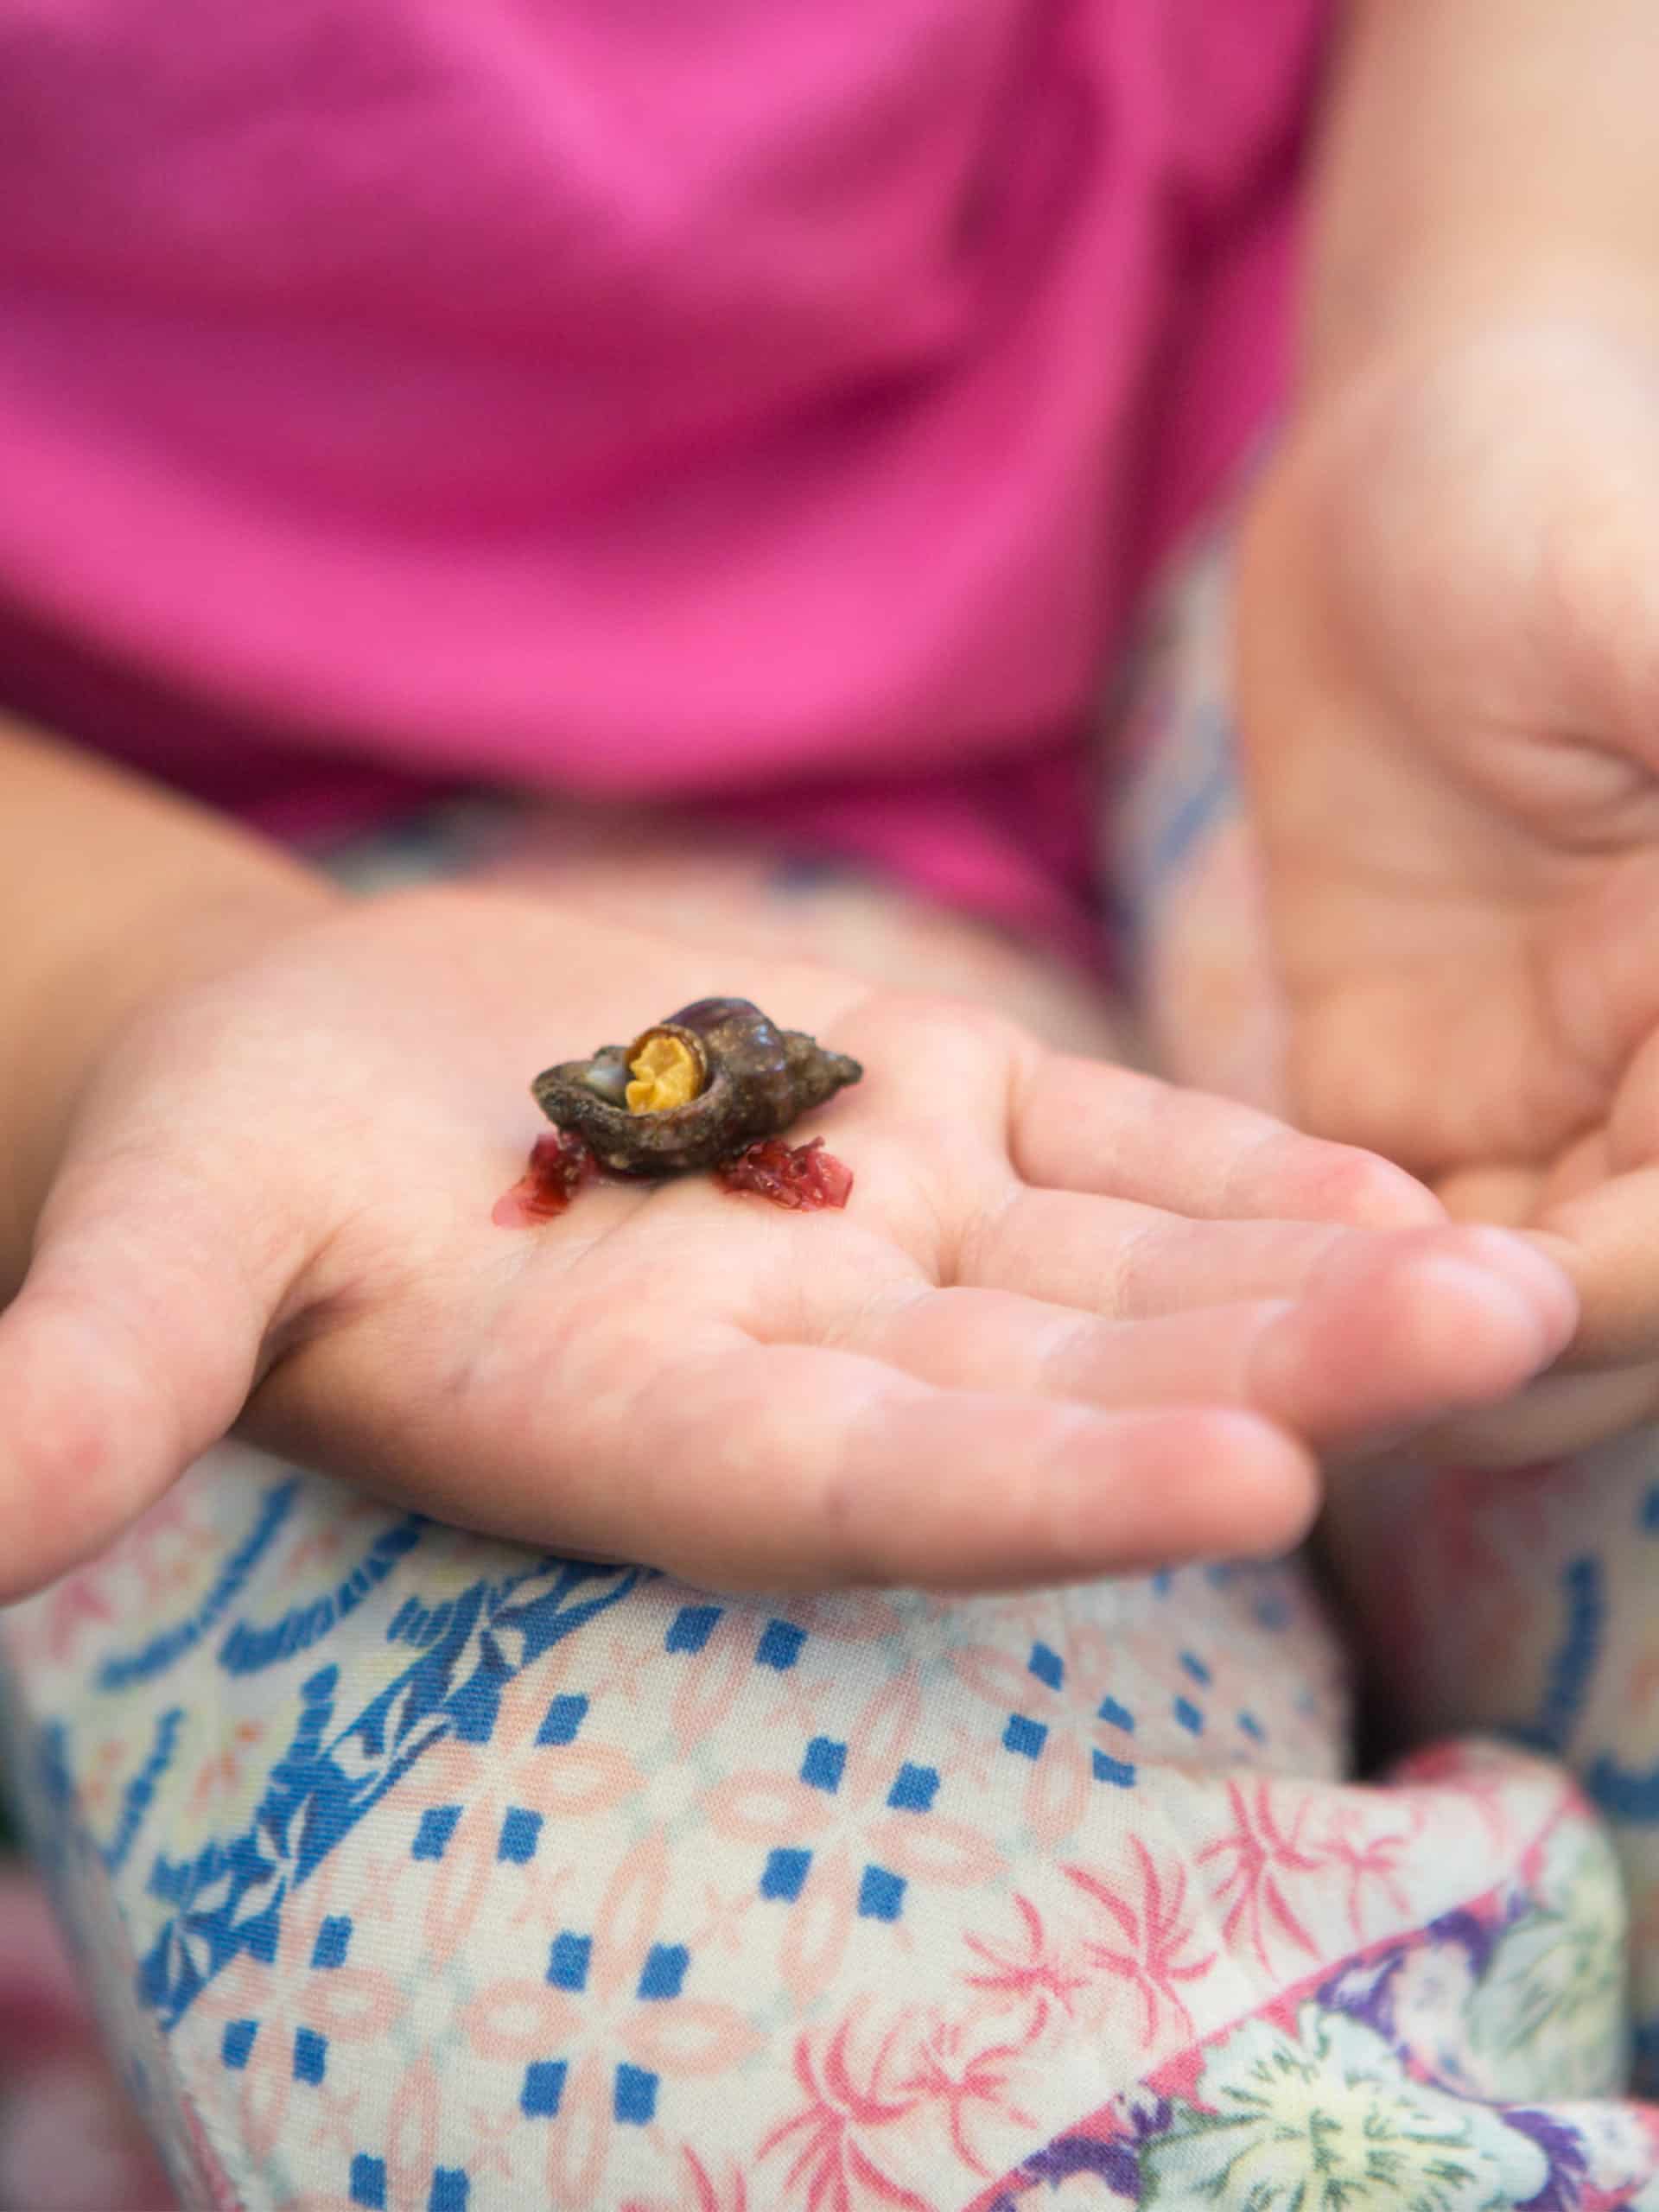 Close up of child's hand holding a mollusk.